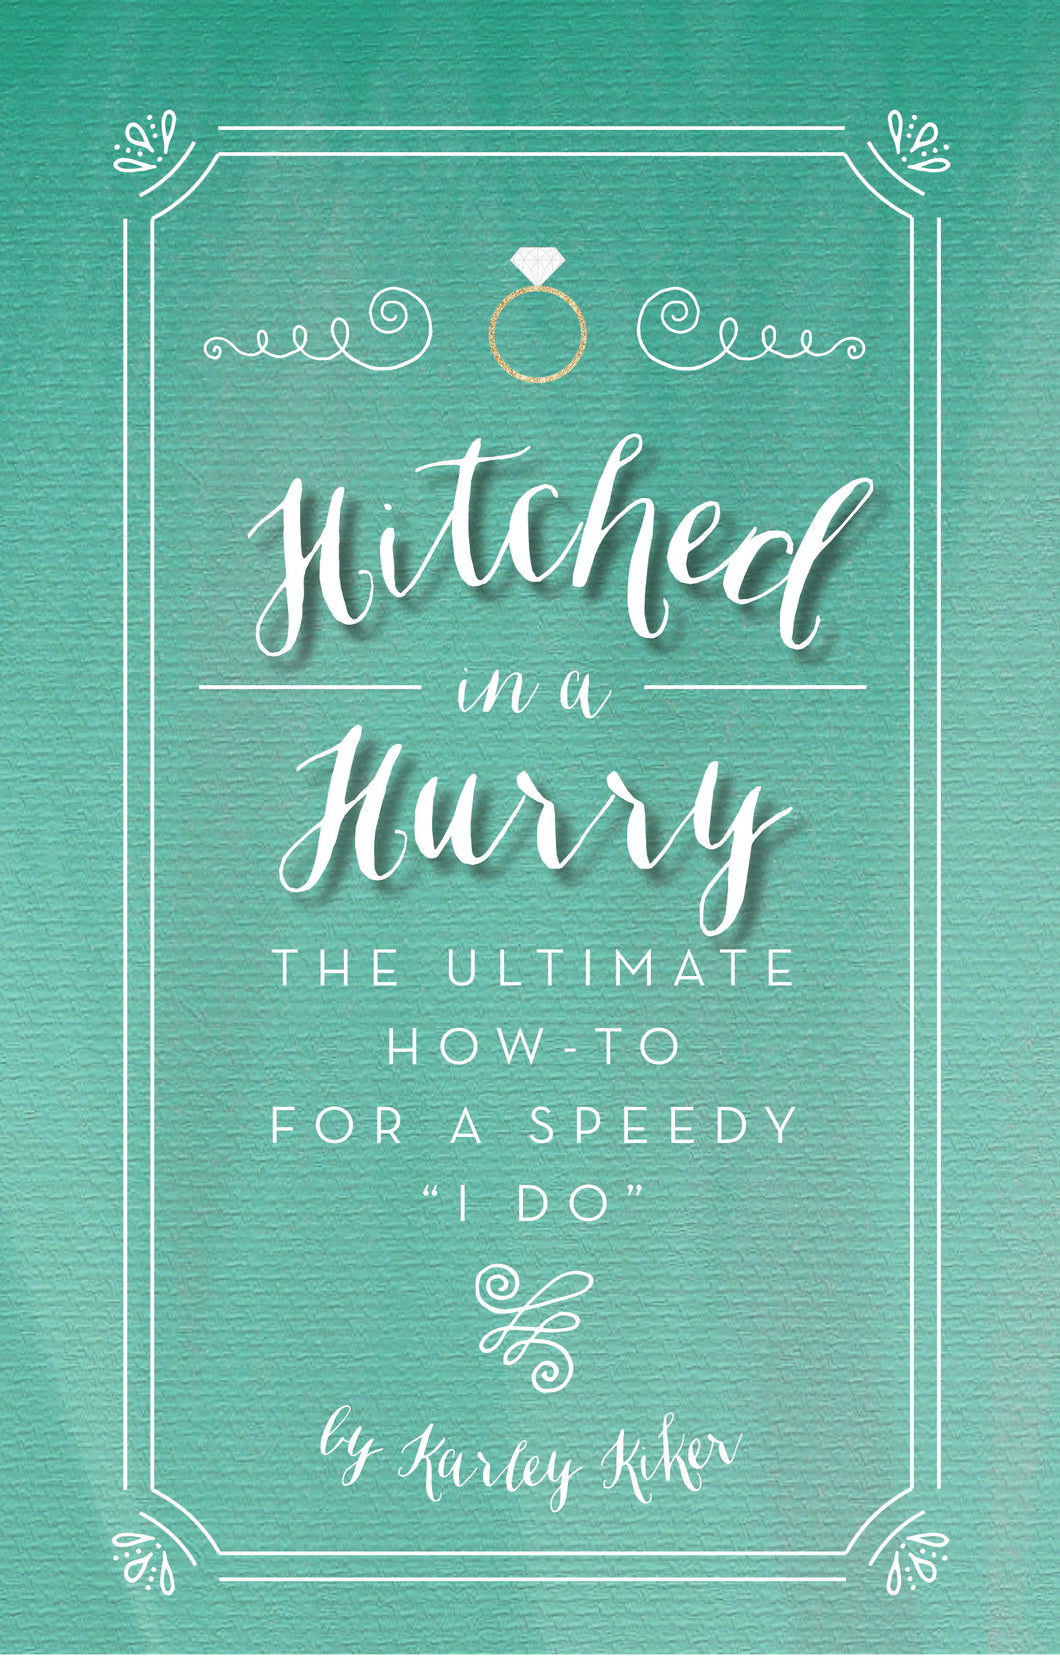 Hitched in a Hurry: The Ultimate How-To for a Speedy 